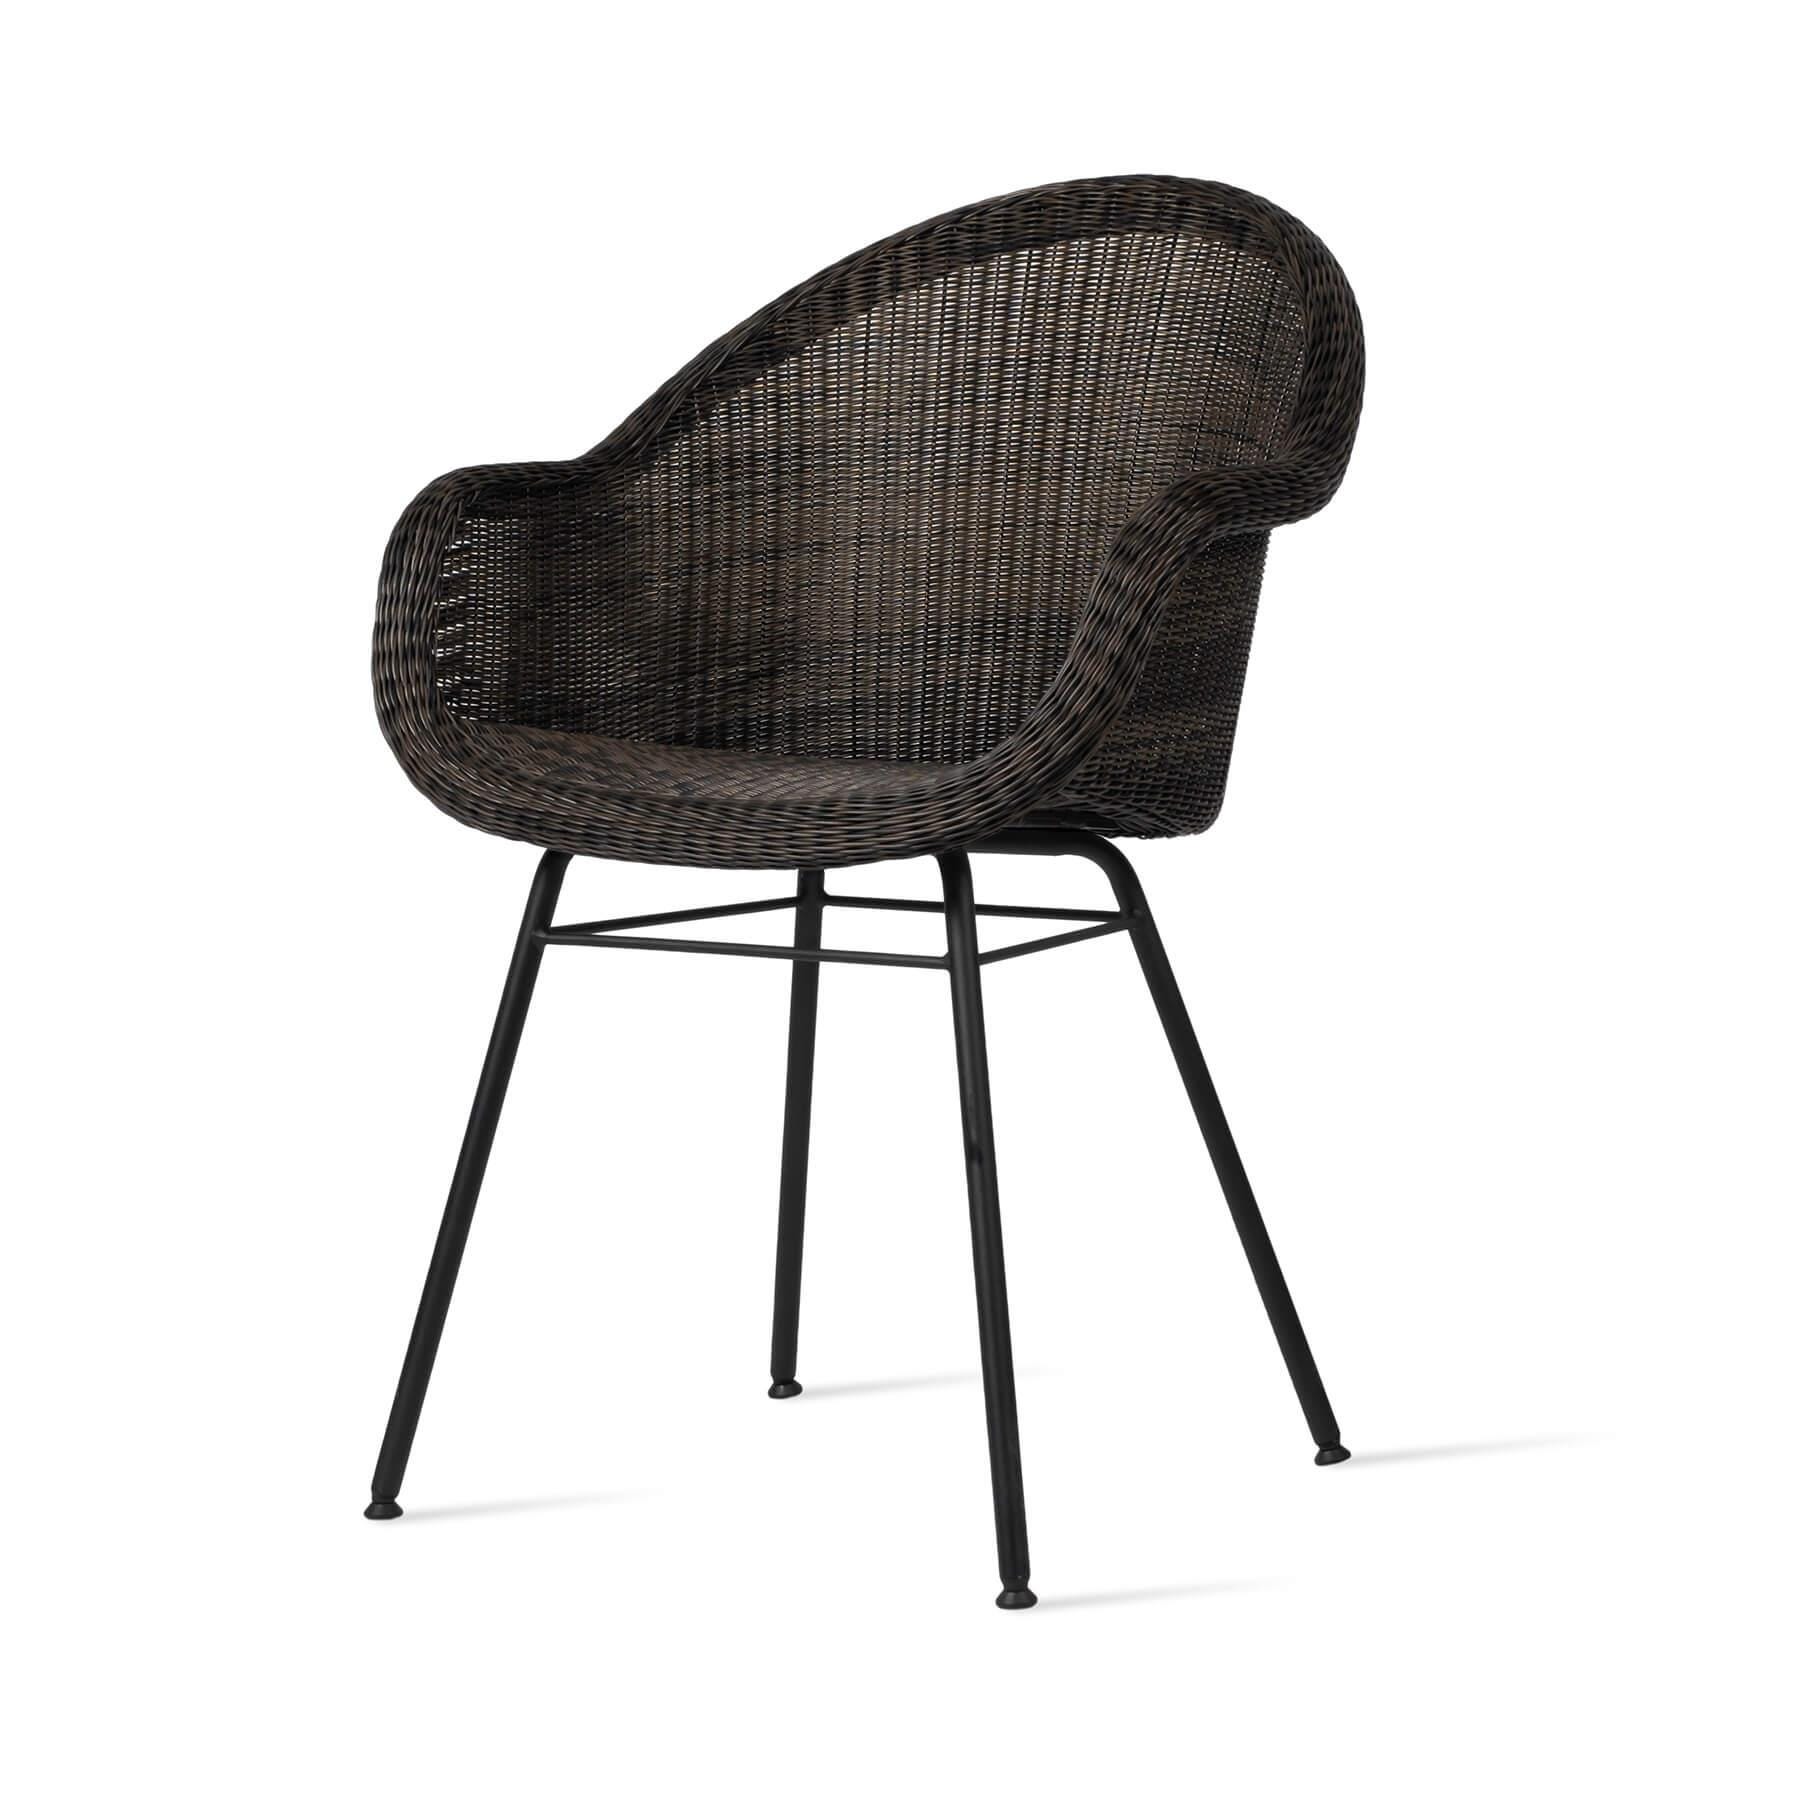 Vincent Sheppard Edgard Dining Chair Steel A Base Black Designer Furniture From Holloways Of Ludlow